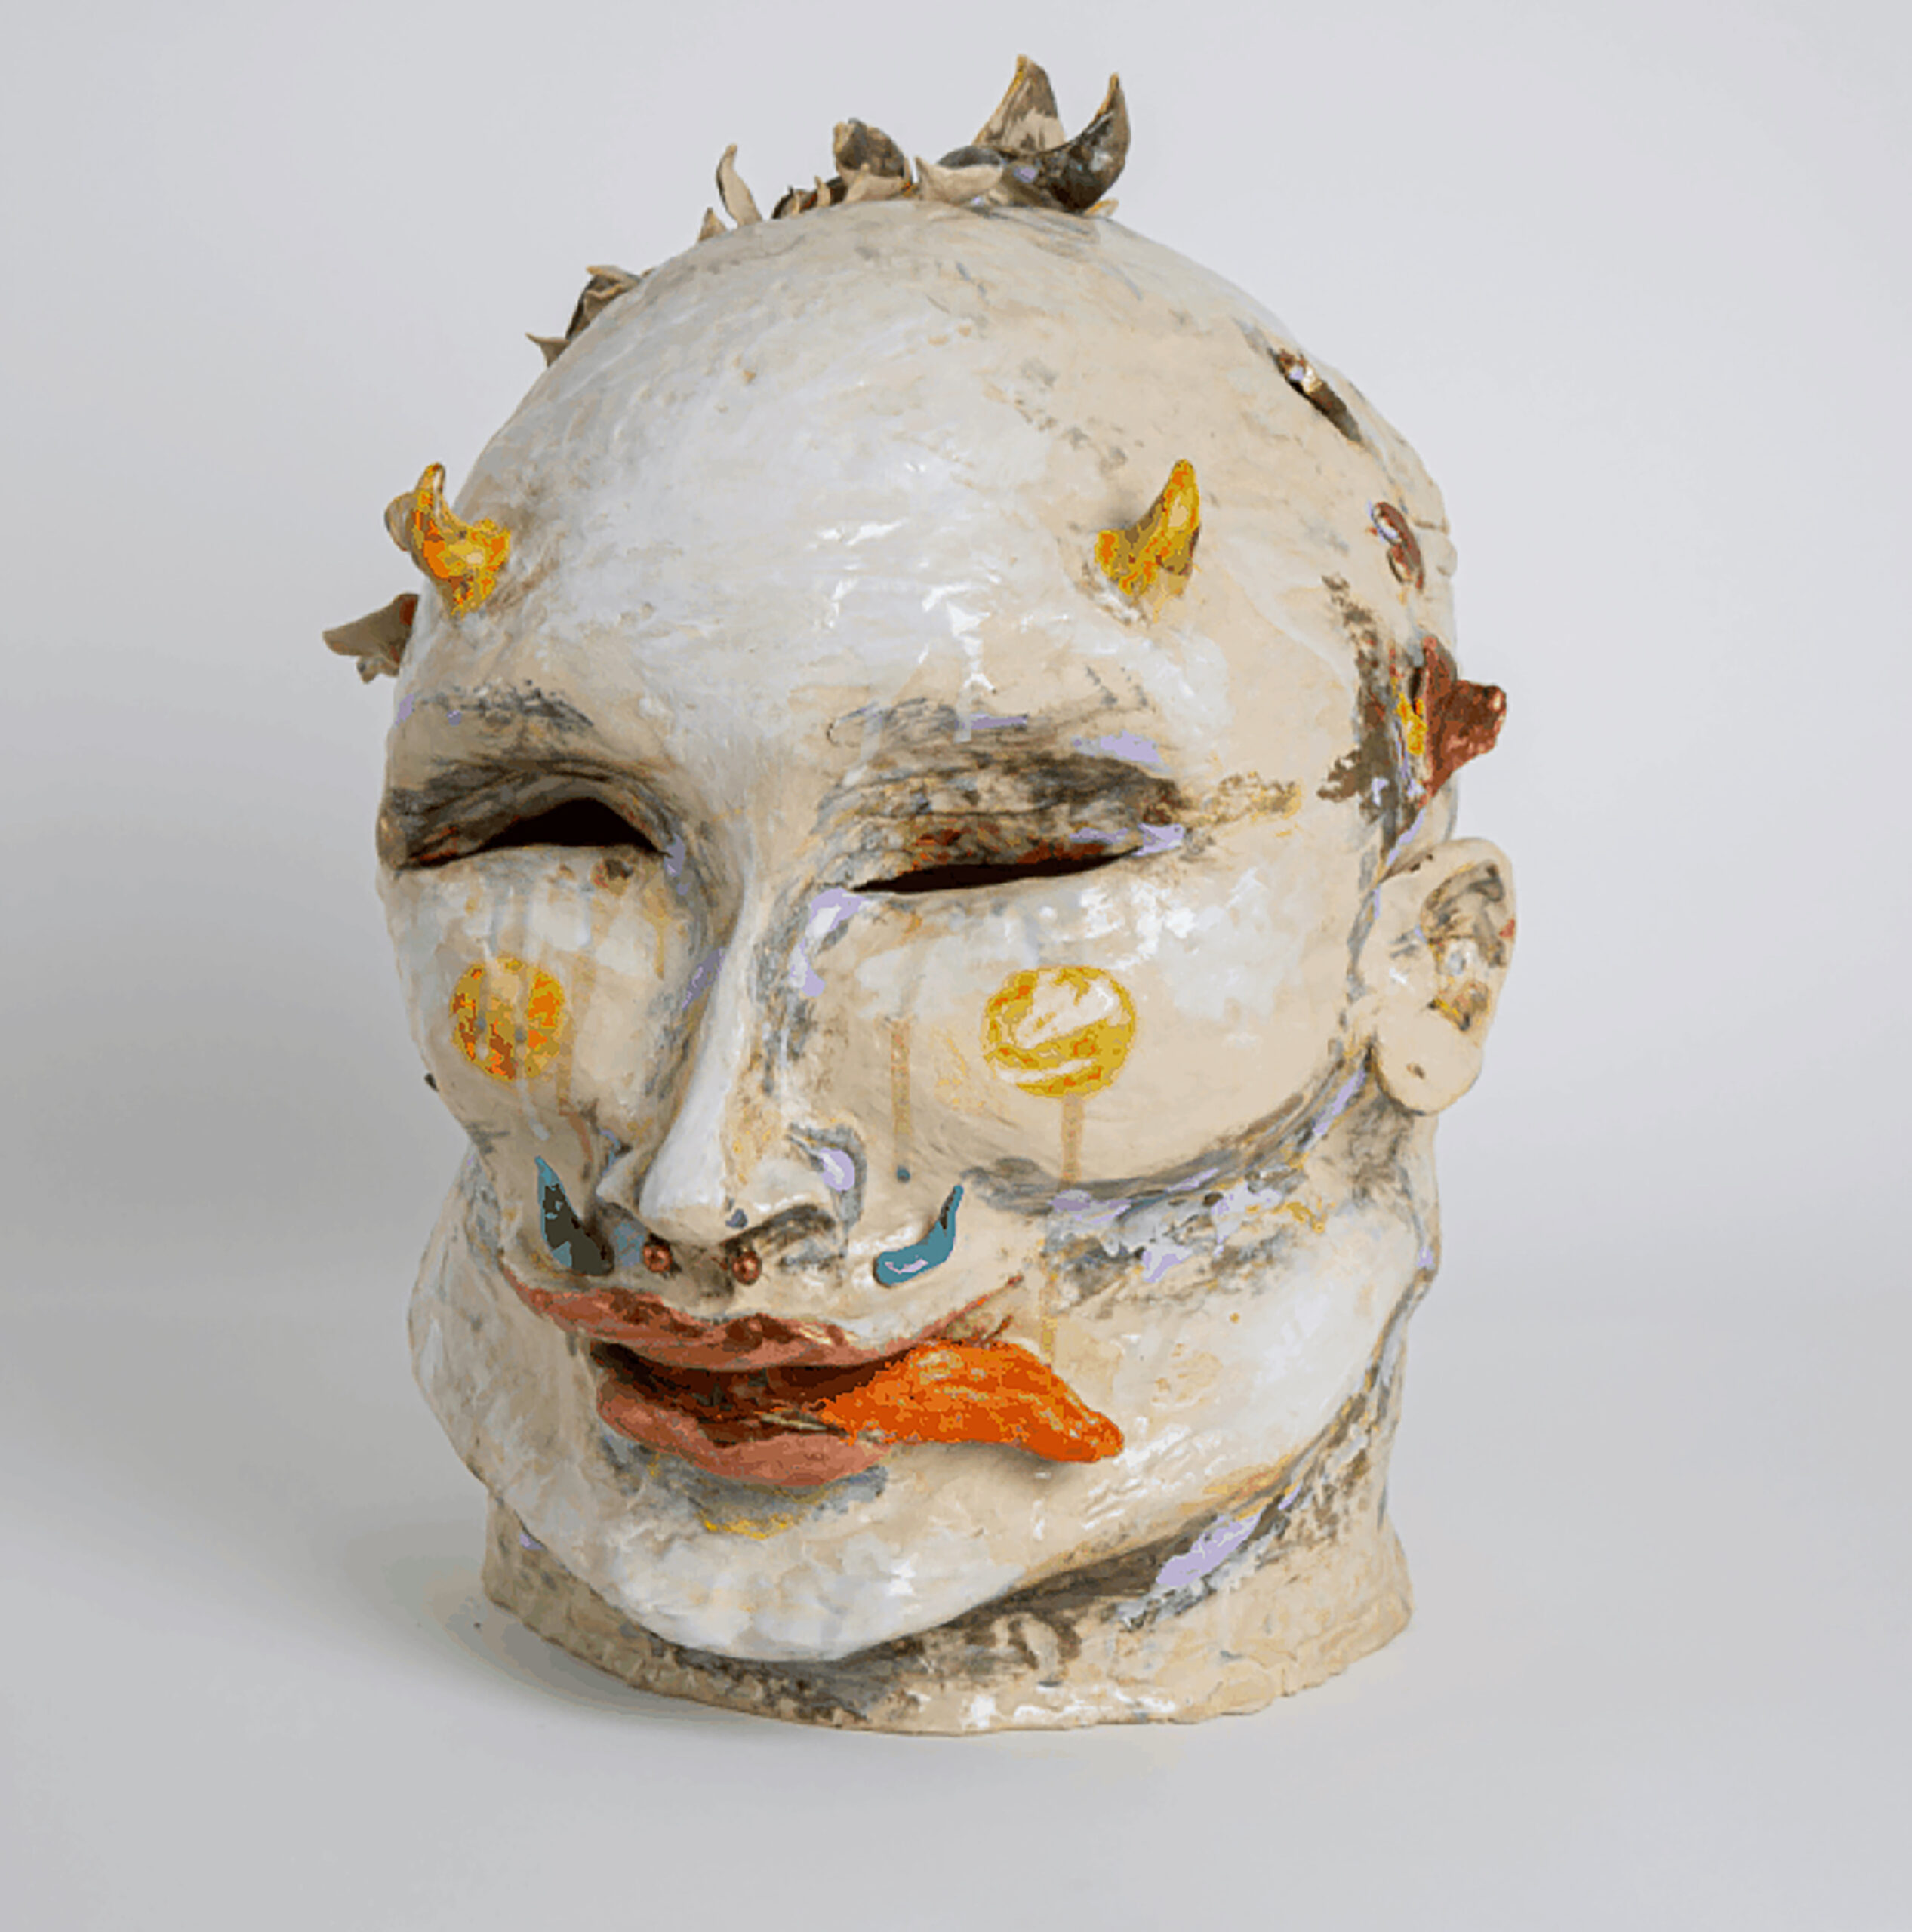 sculpture of a head, appears to be ceramic, with white paint as a base and bright colors to denote lines